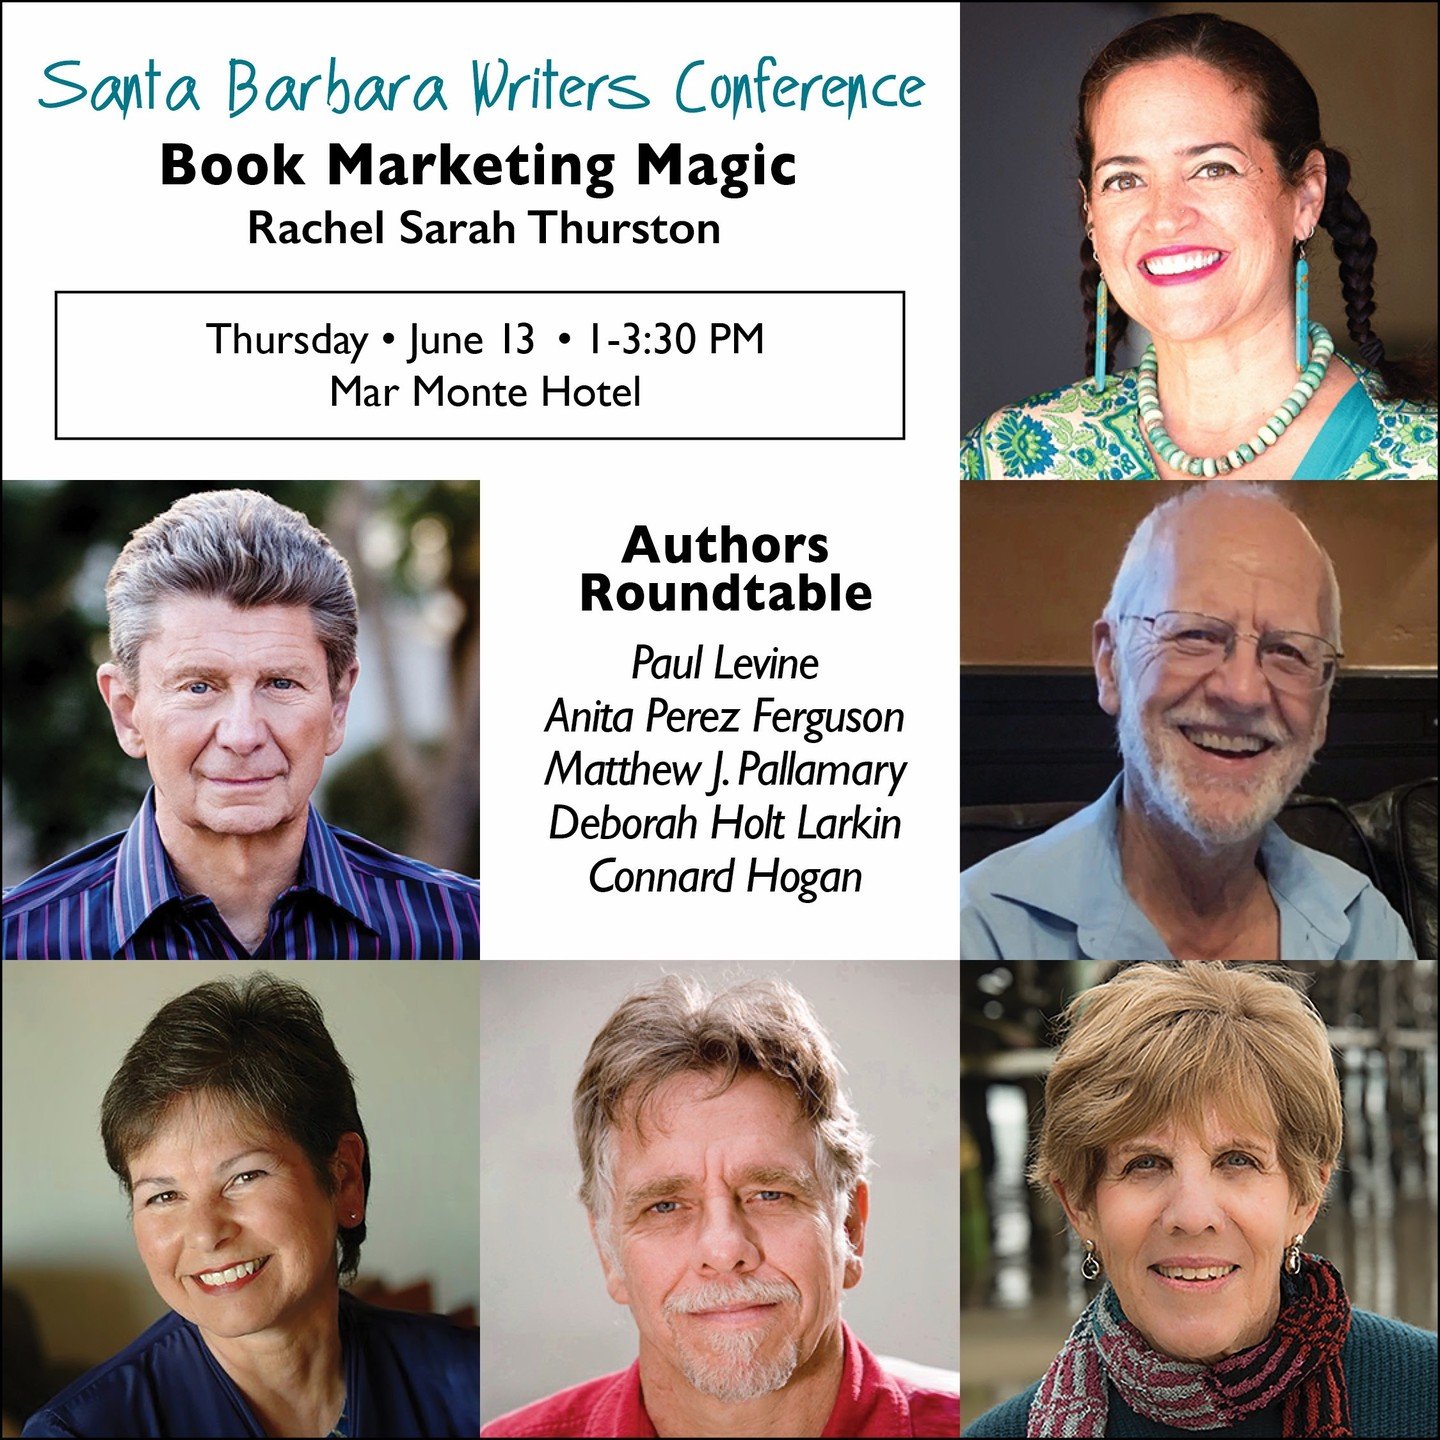 Rachel Sarah Thurston offers the &rdquo;Top 12 Magical Marketing Moves to Elevate Your Author Brand and Make Your Book Sparkle, Stand Out, and Achieve Marketplace Success.&rdquo; She&rsquo;ll lead &quot;Authors of the Round Table&quot; in a deep dive